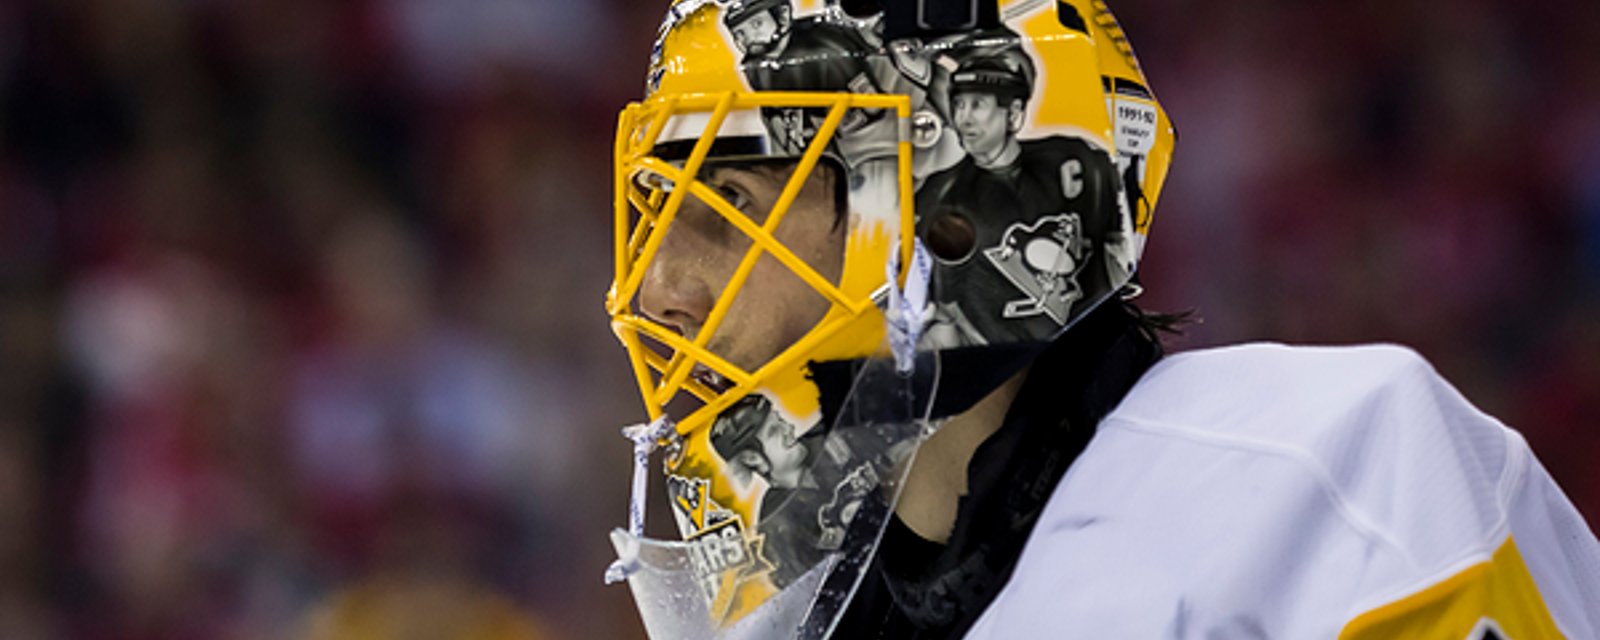  Marc-André Fleury's class act reminds everyone why he's one the league's most respected players